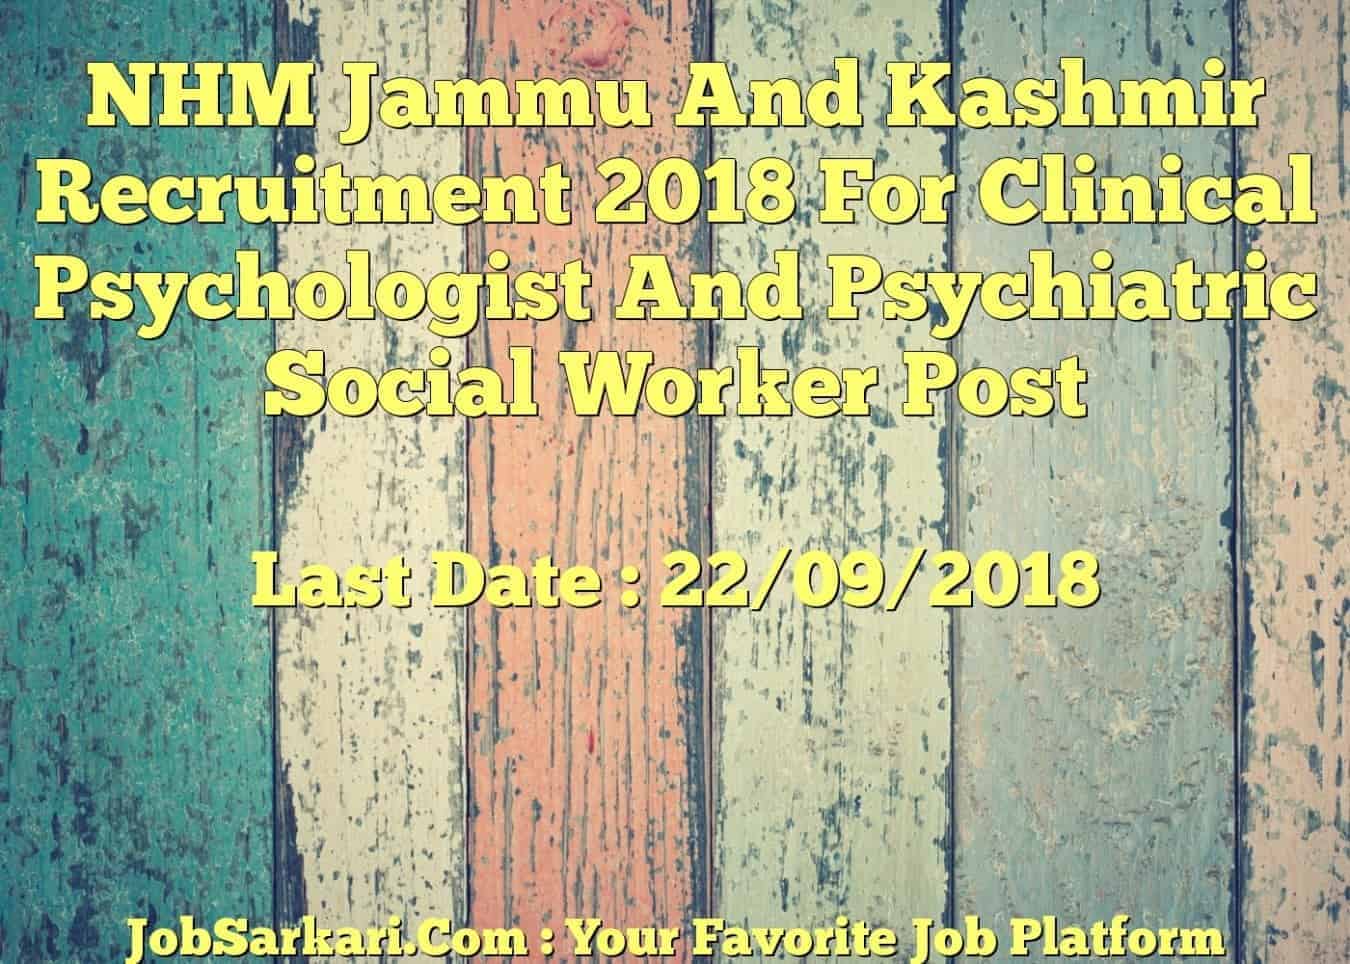 NHM Jammu And Kashmir Recruitment 2018 For Clinical Psychologist And Psychiatric Social Worker Post